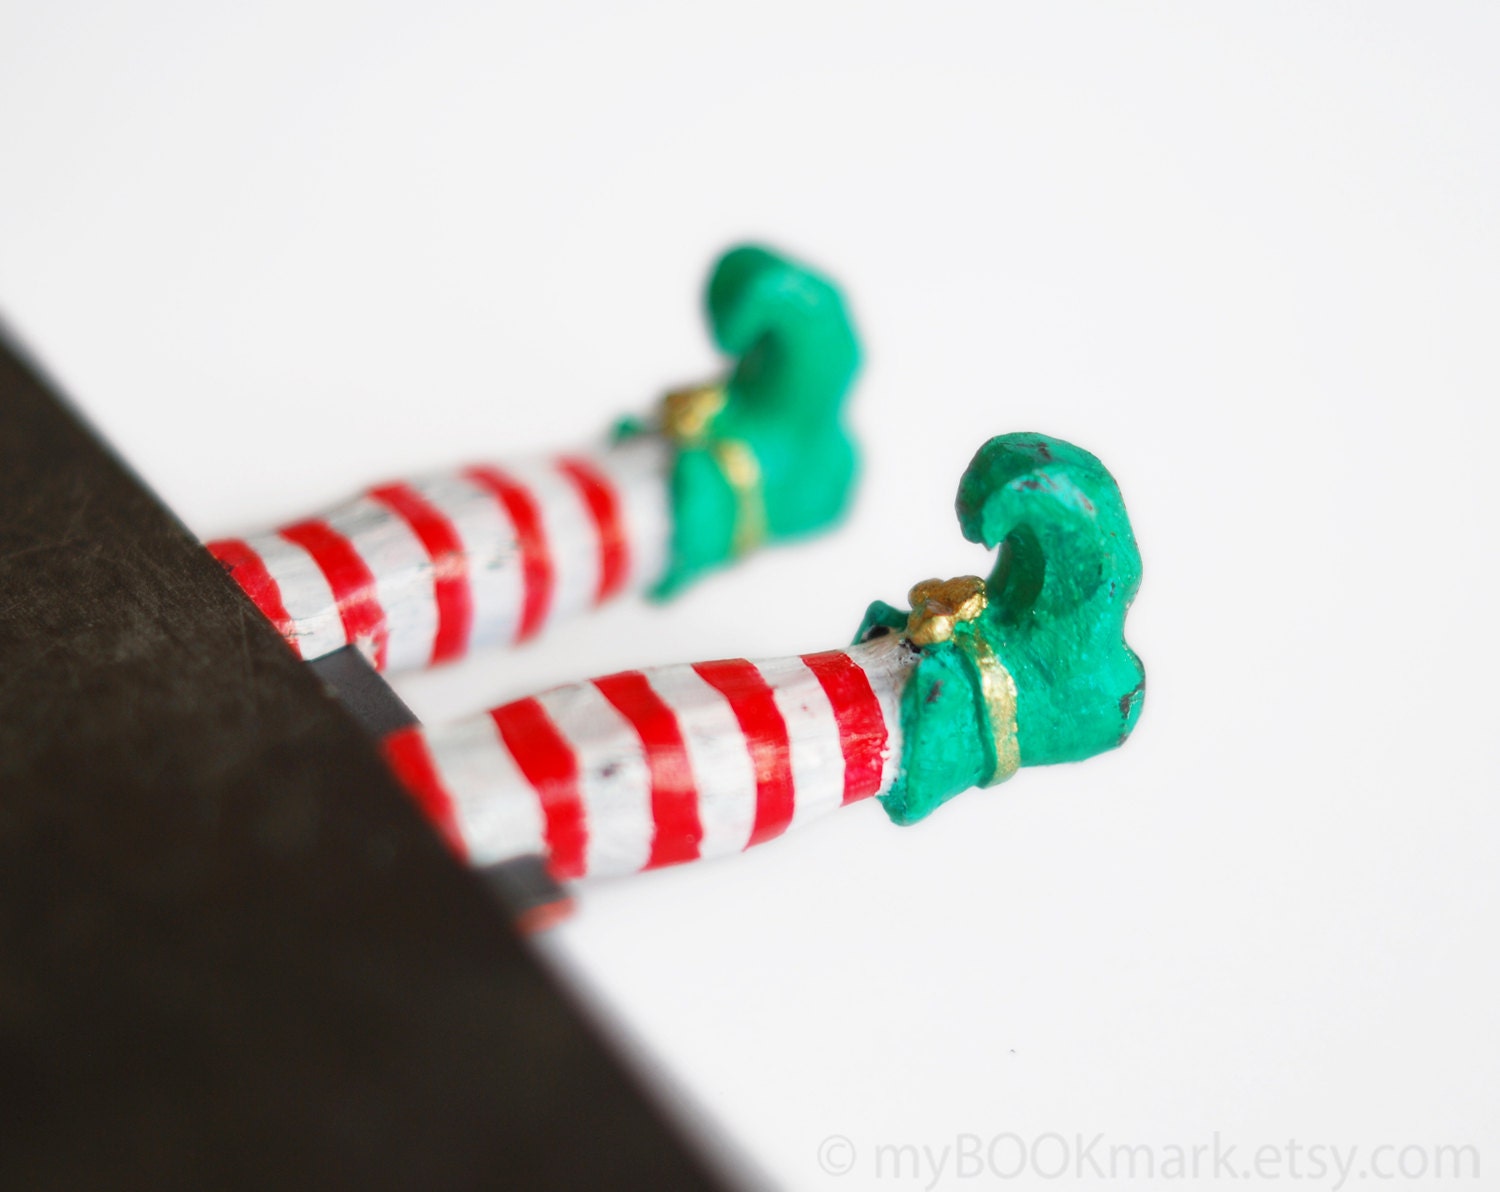 Elf in the book. Green shoes. Unusual art bookmark. Fun for kids  oht Christmas